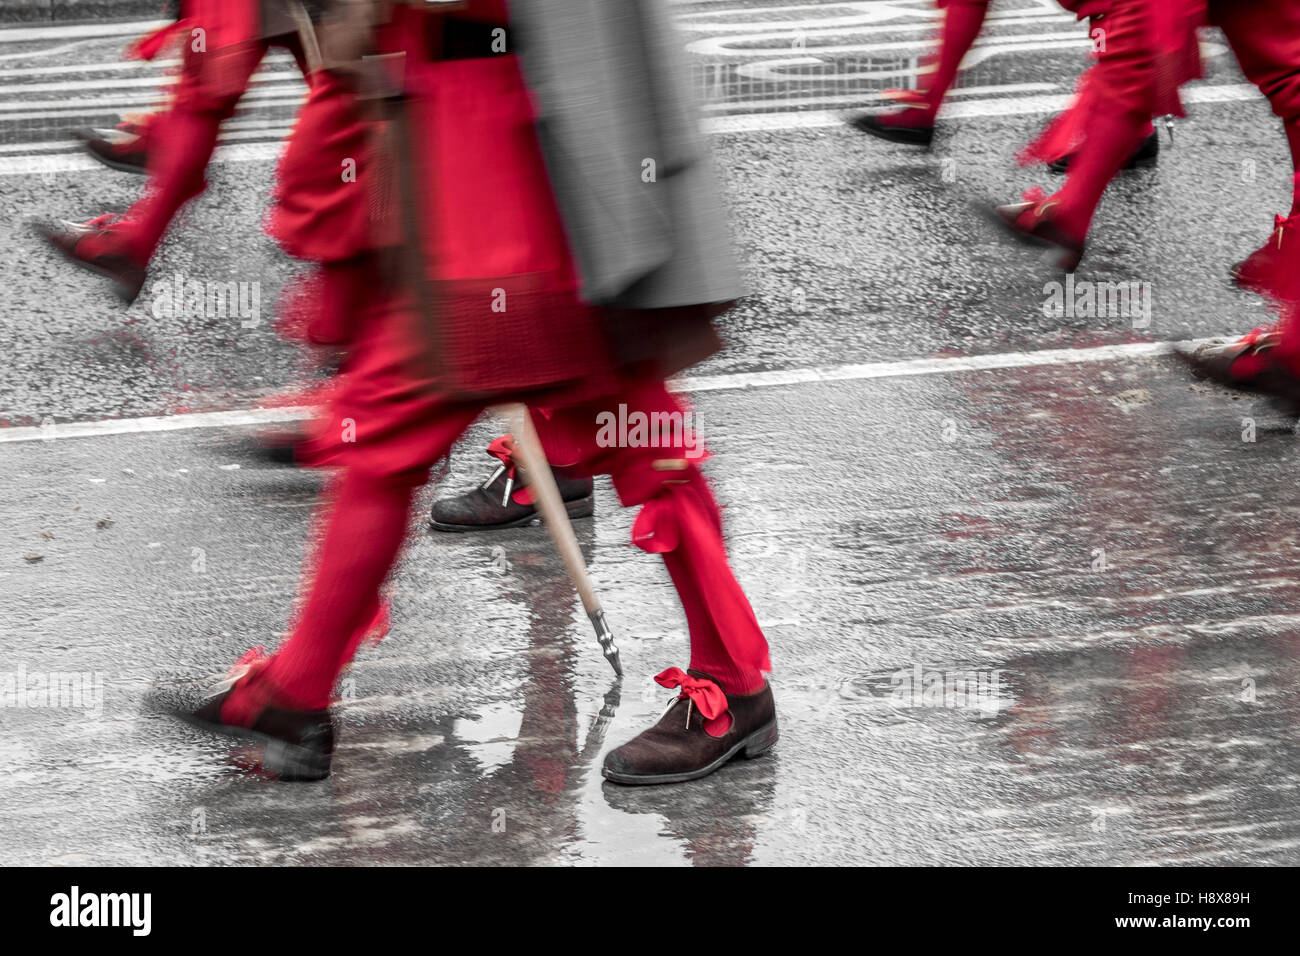 Men march in Lord Mayor's show in London, England November 2016.  Red stockings buckle shoes royalty royal soldier Stock Photo